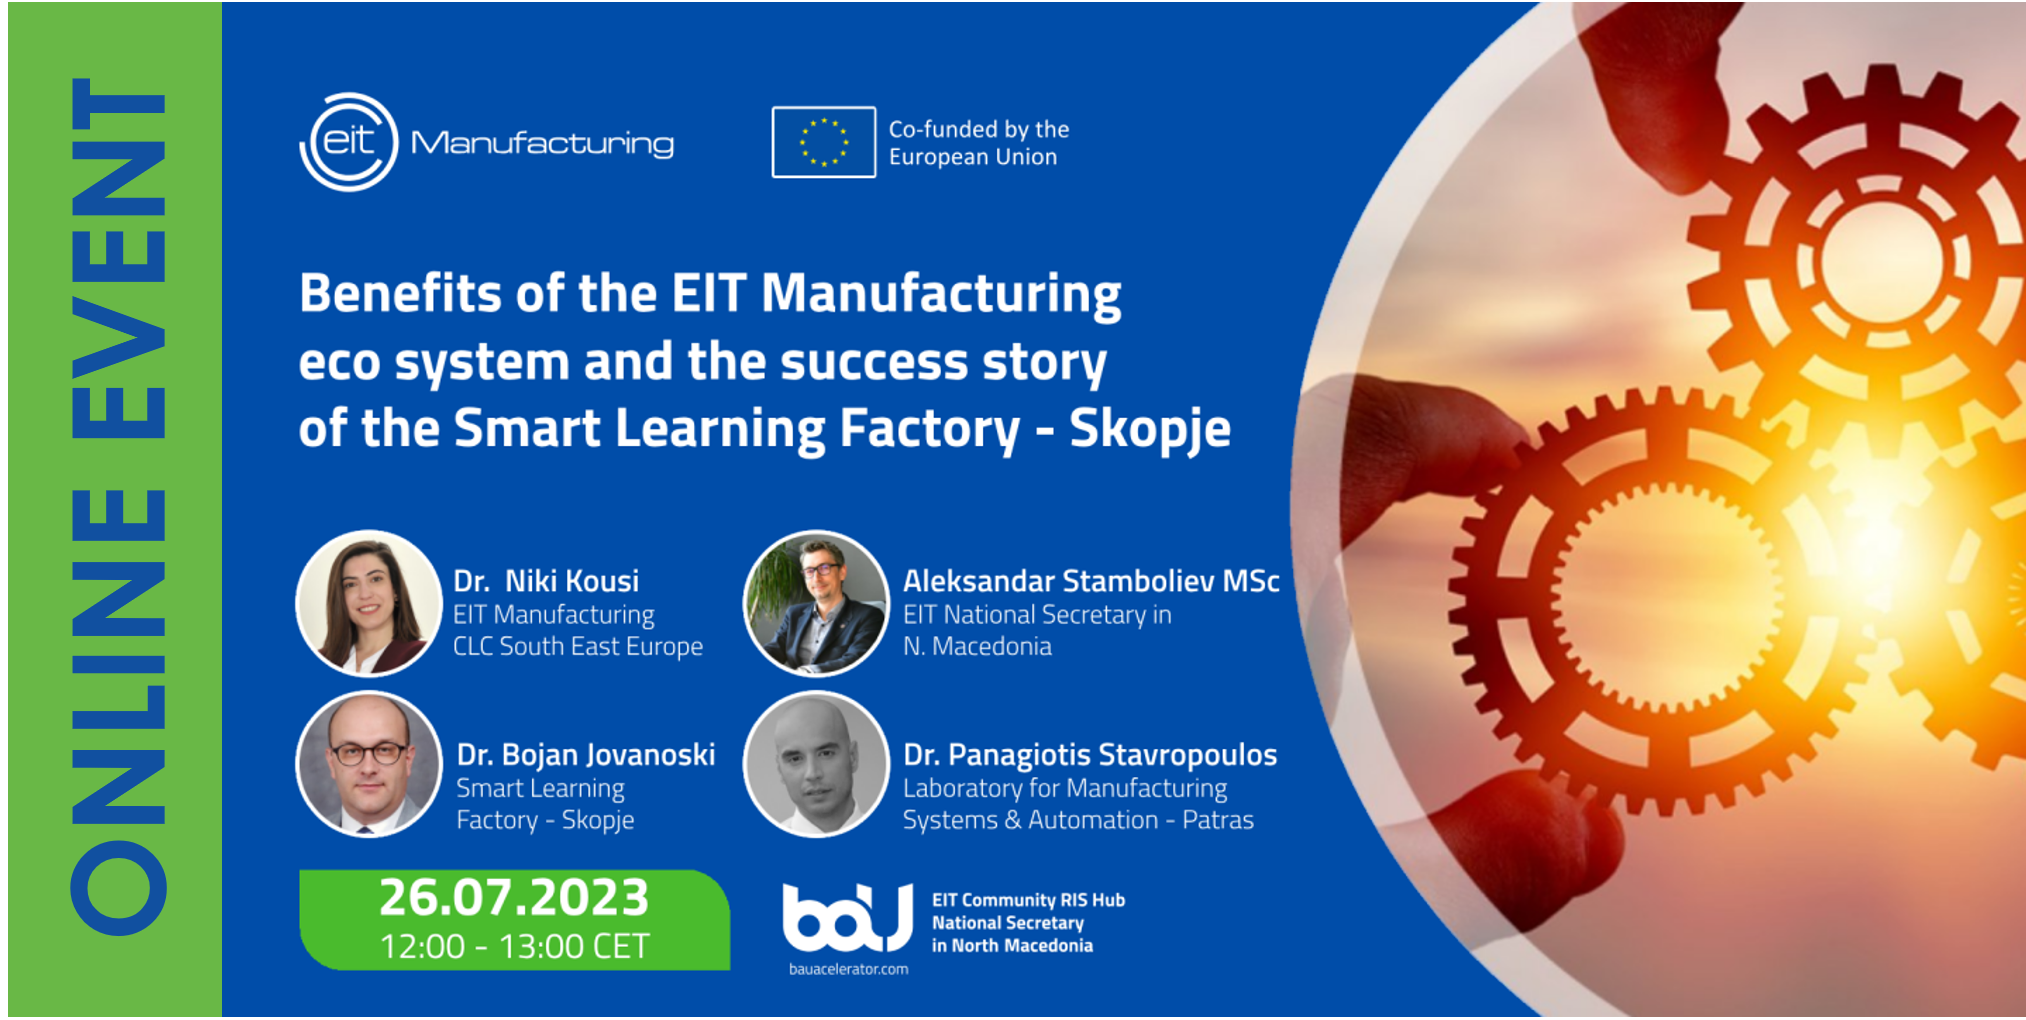 Online event: Benefits of the EIT Manufacturing ecosystem and the success story of the SLFS